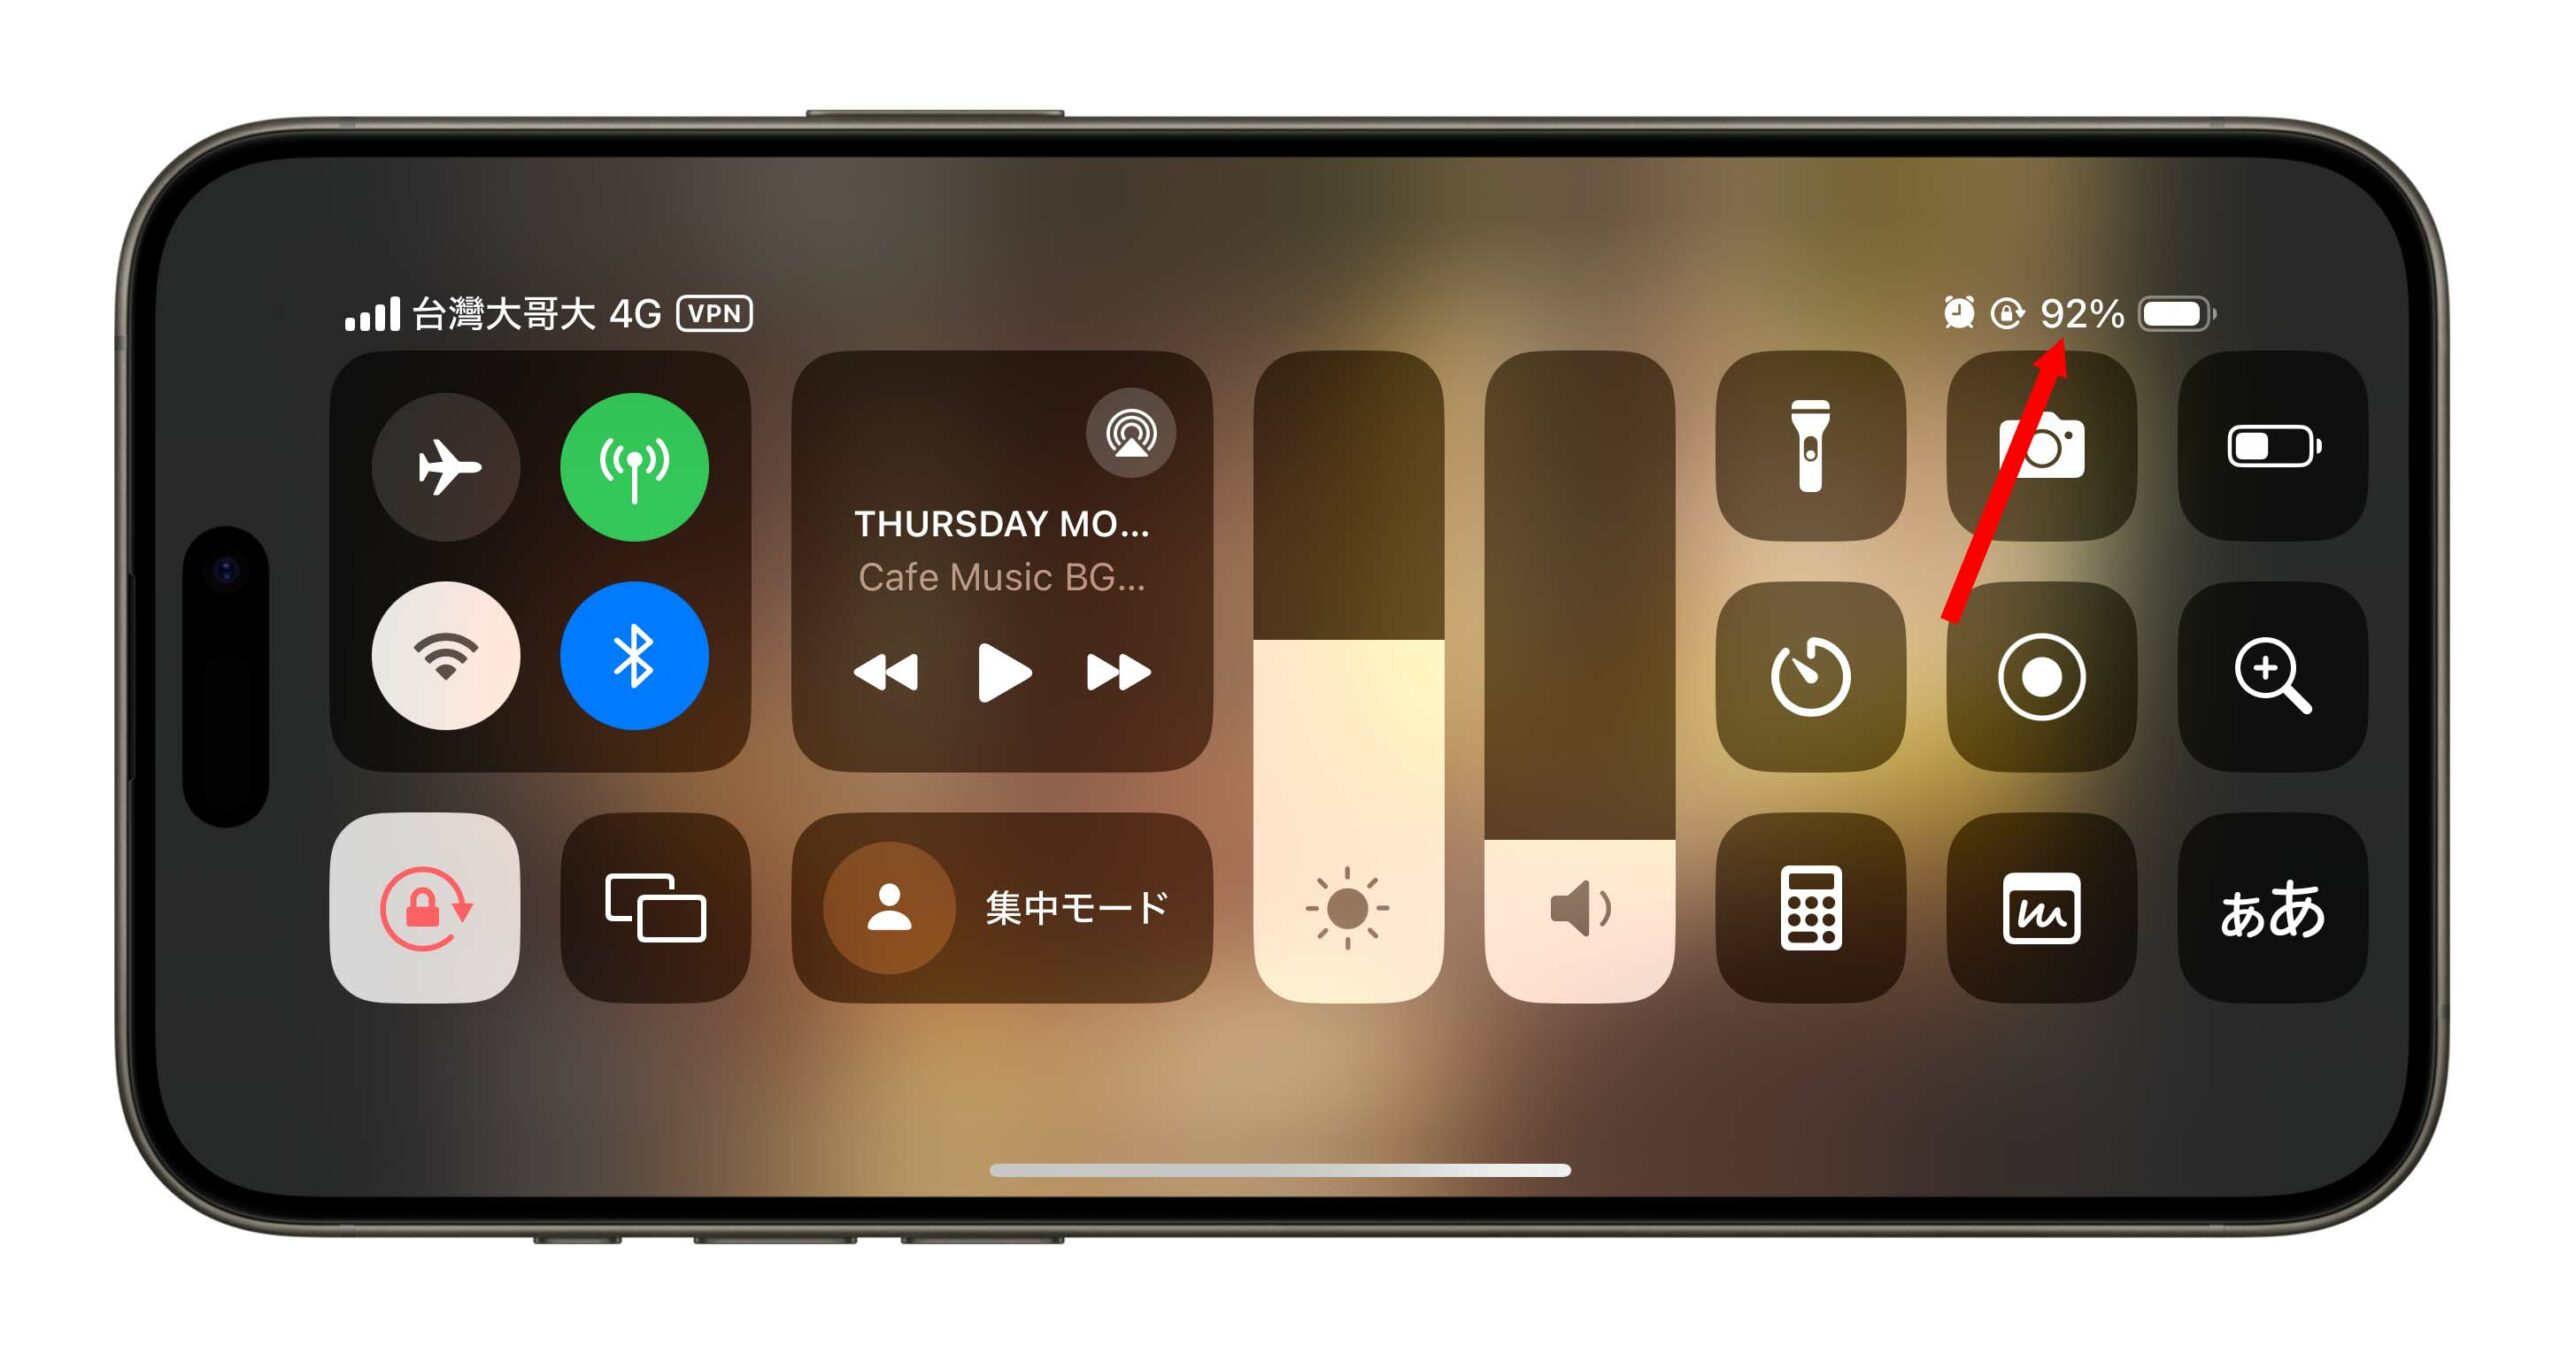 iPhone コントロールセンター バッテリー残量